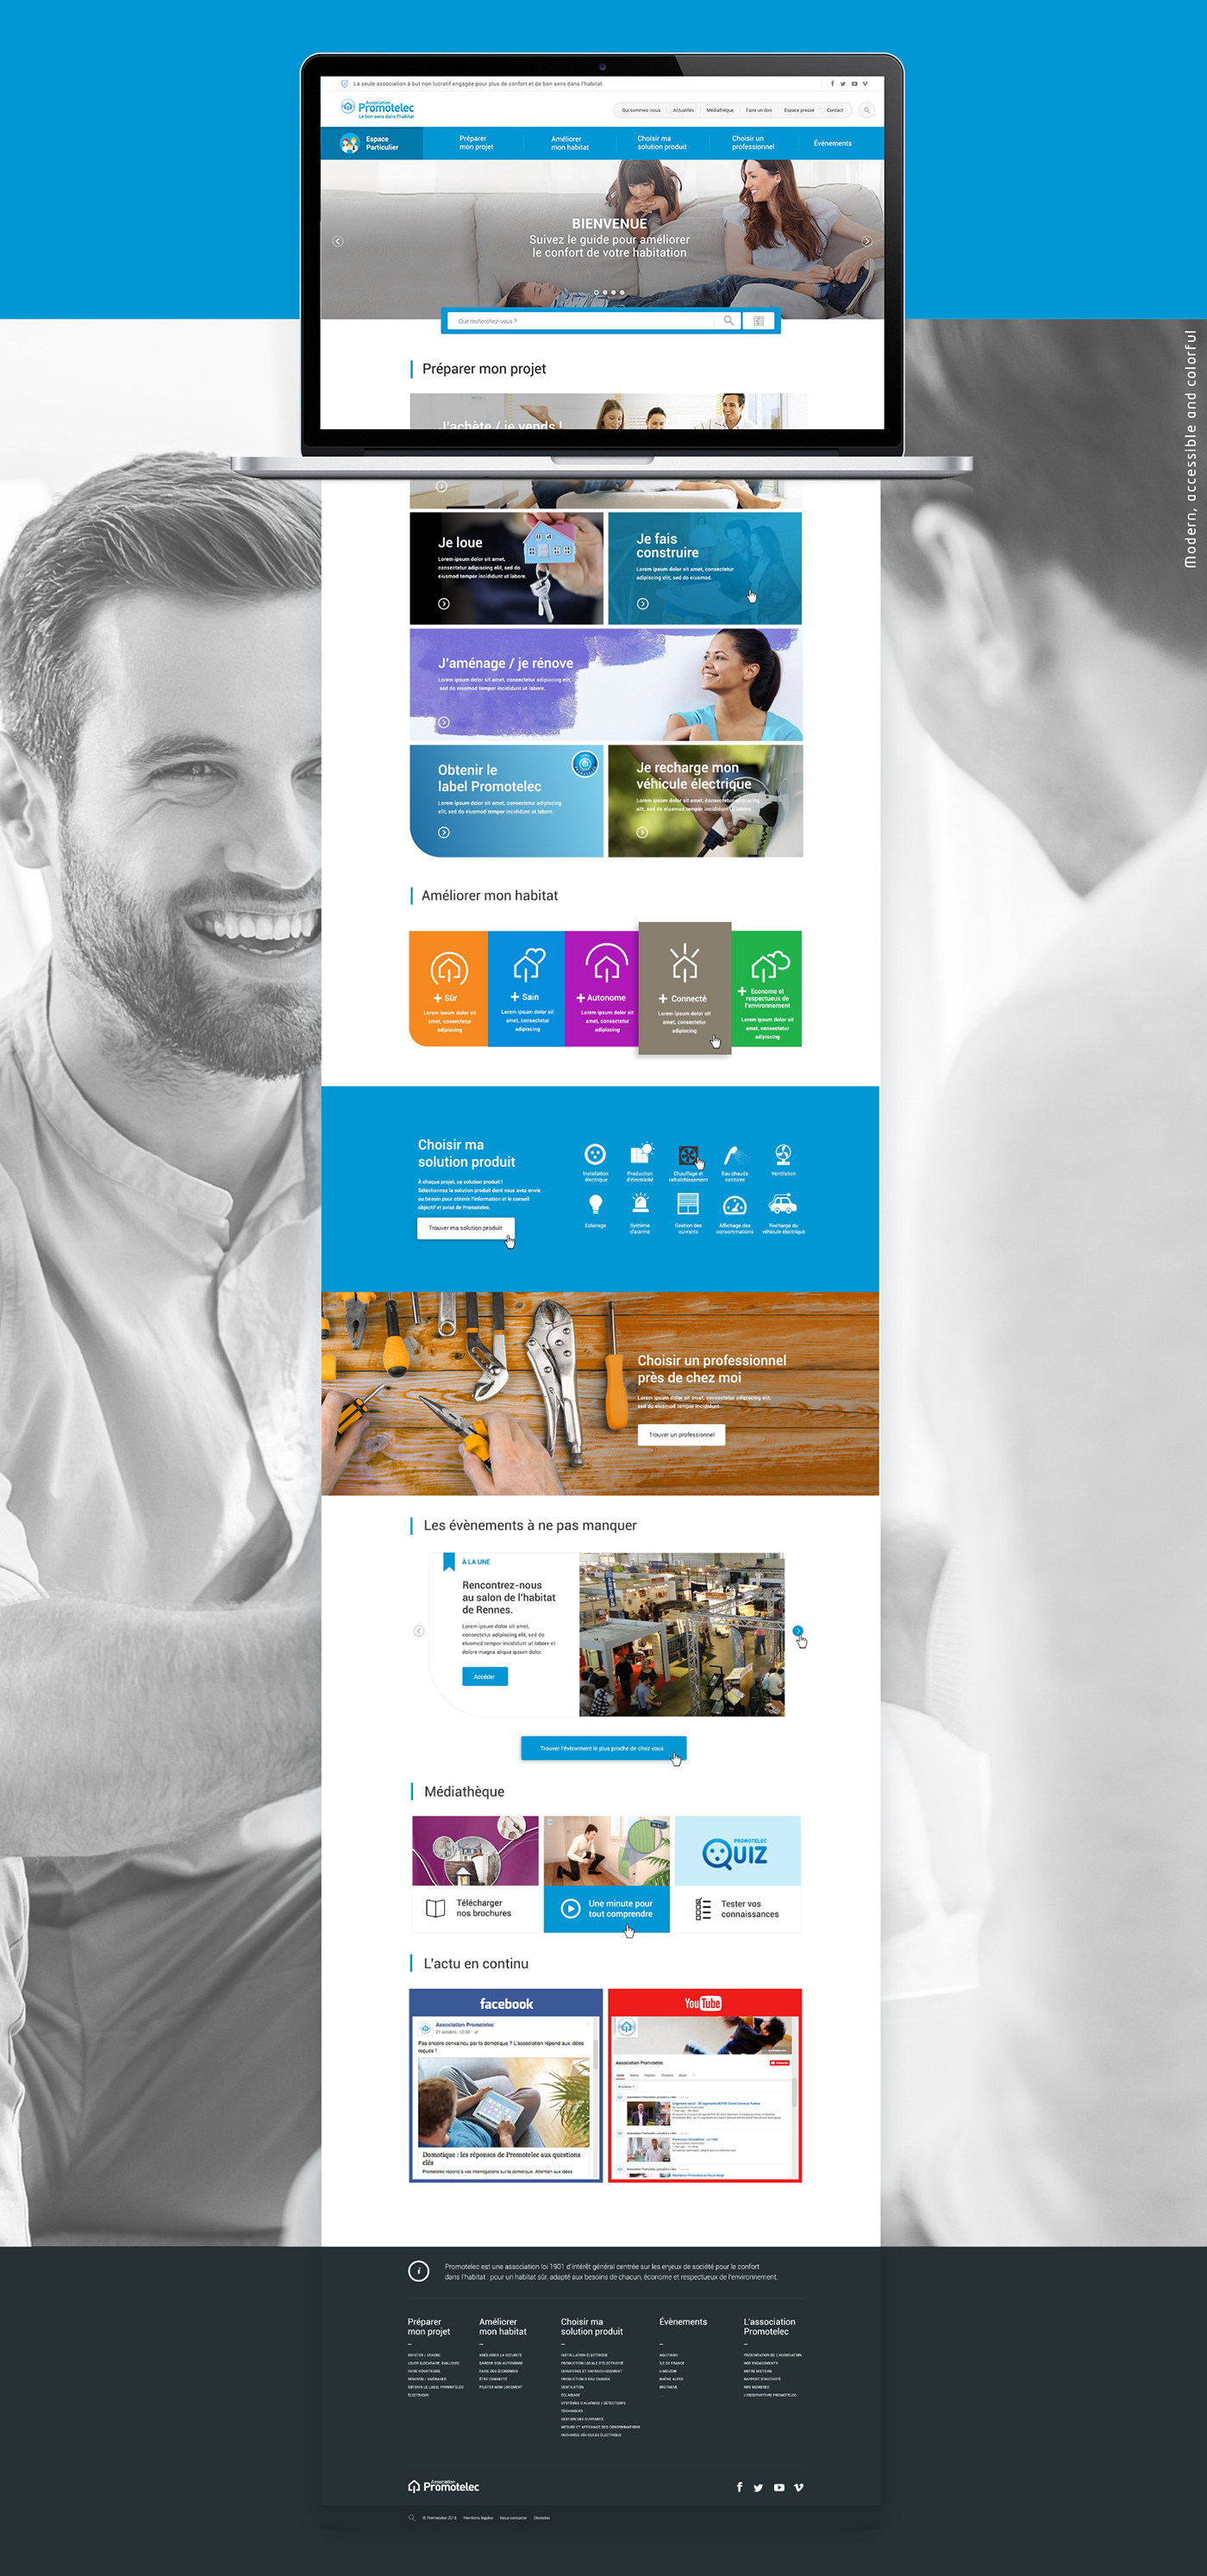 Webdesign Responsive colorful modern interactive promotelec home ux UI Interface design Icon flat inspire Association